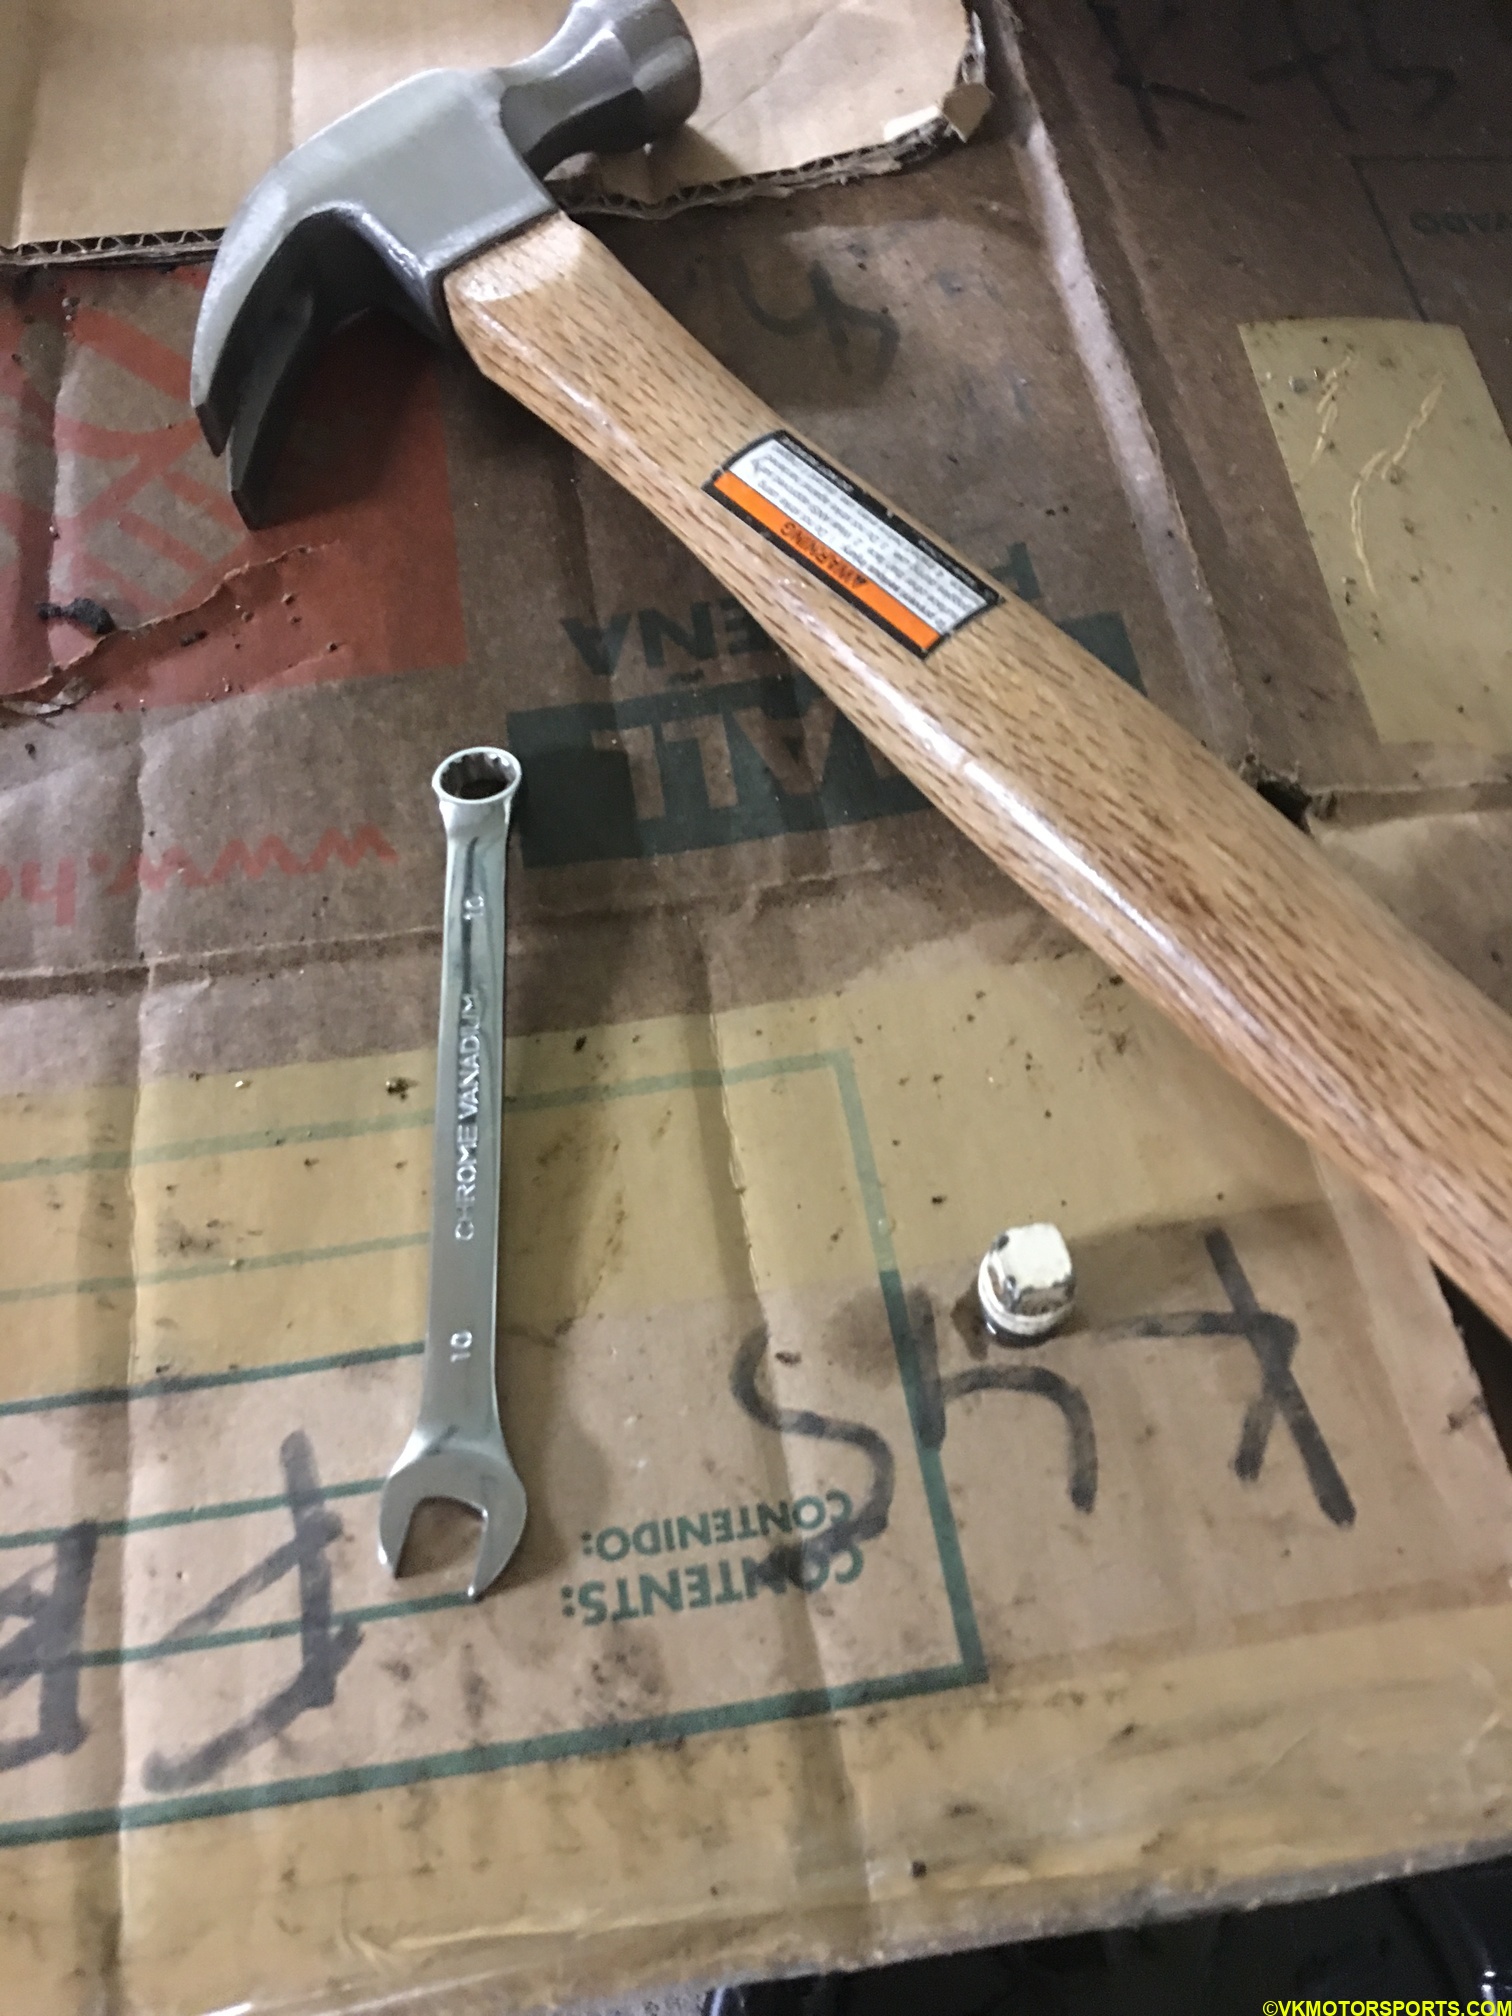 10mm wrench (spanner) and hammer